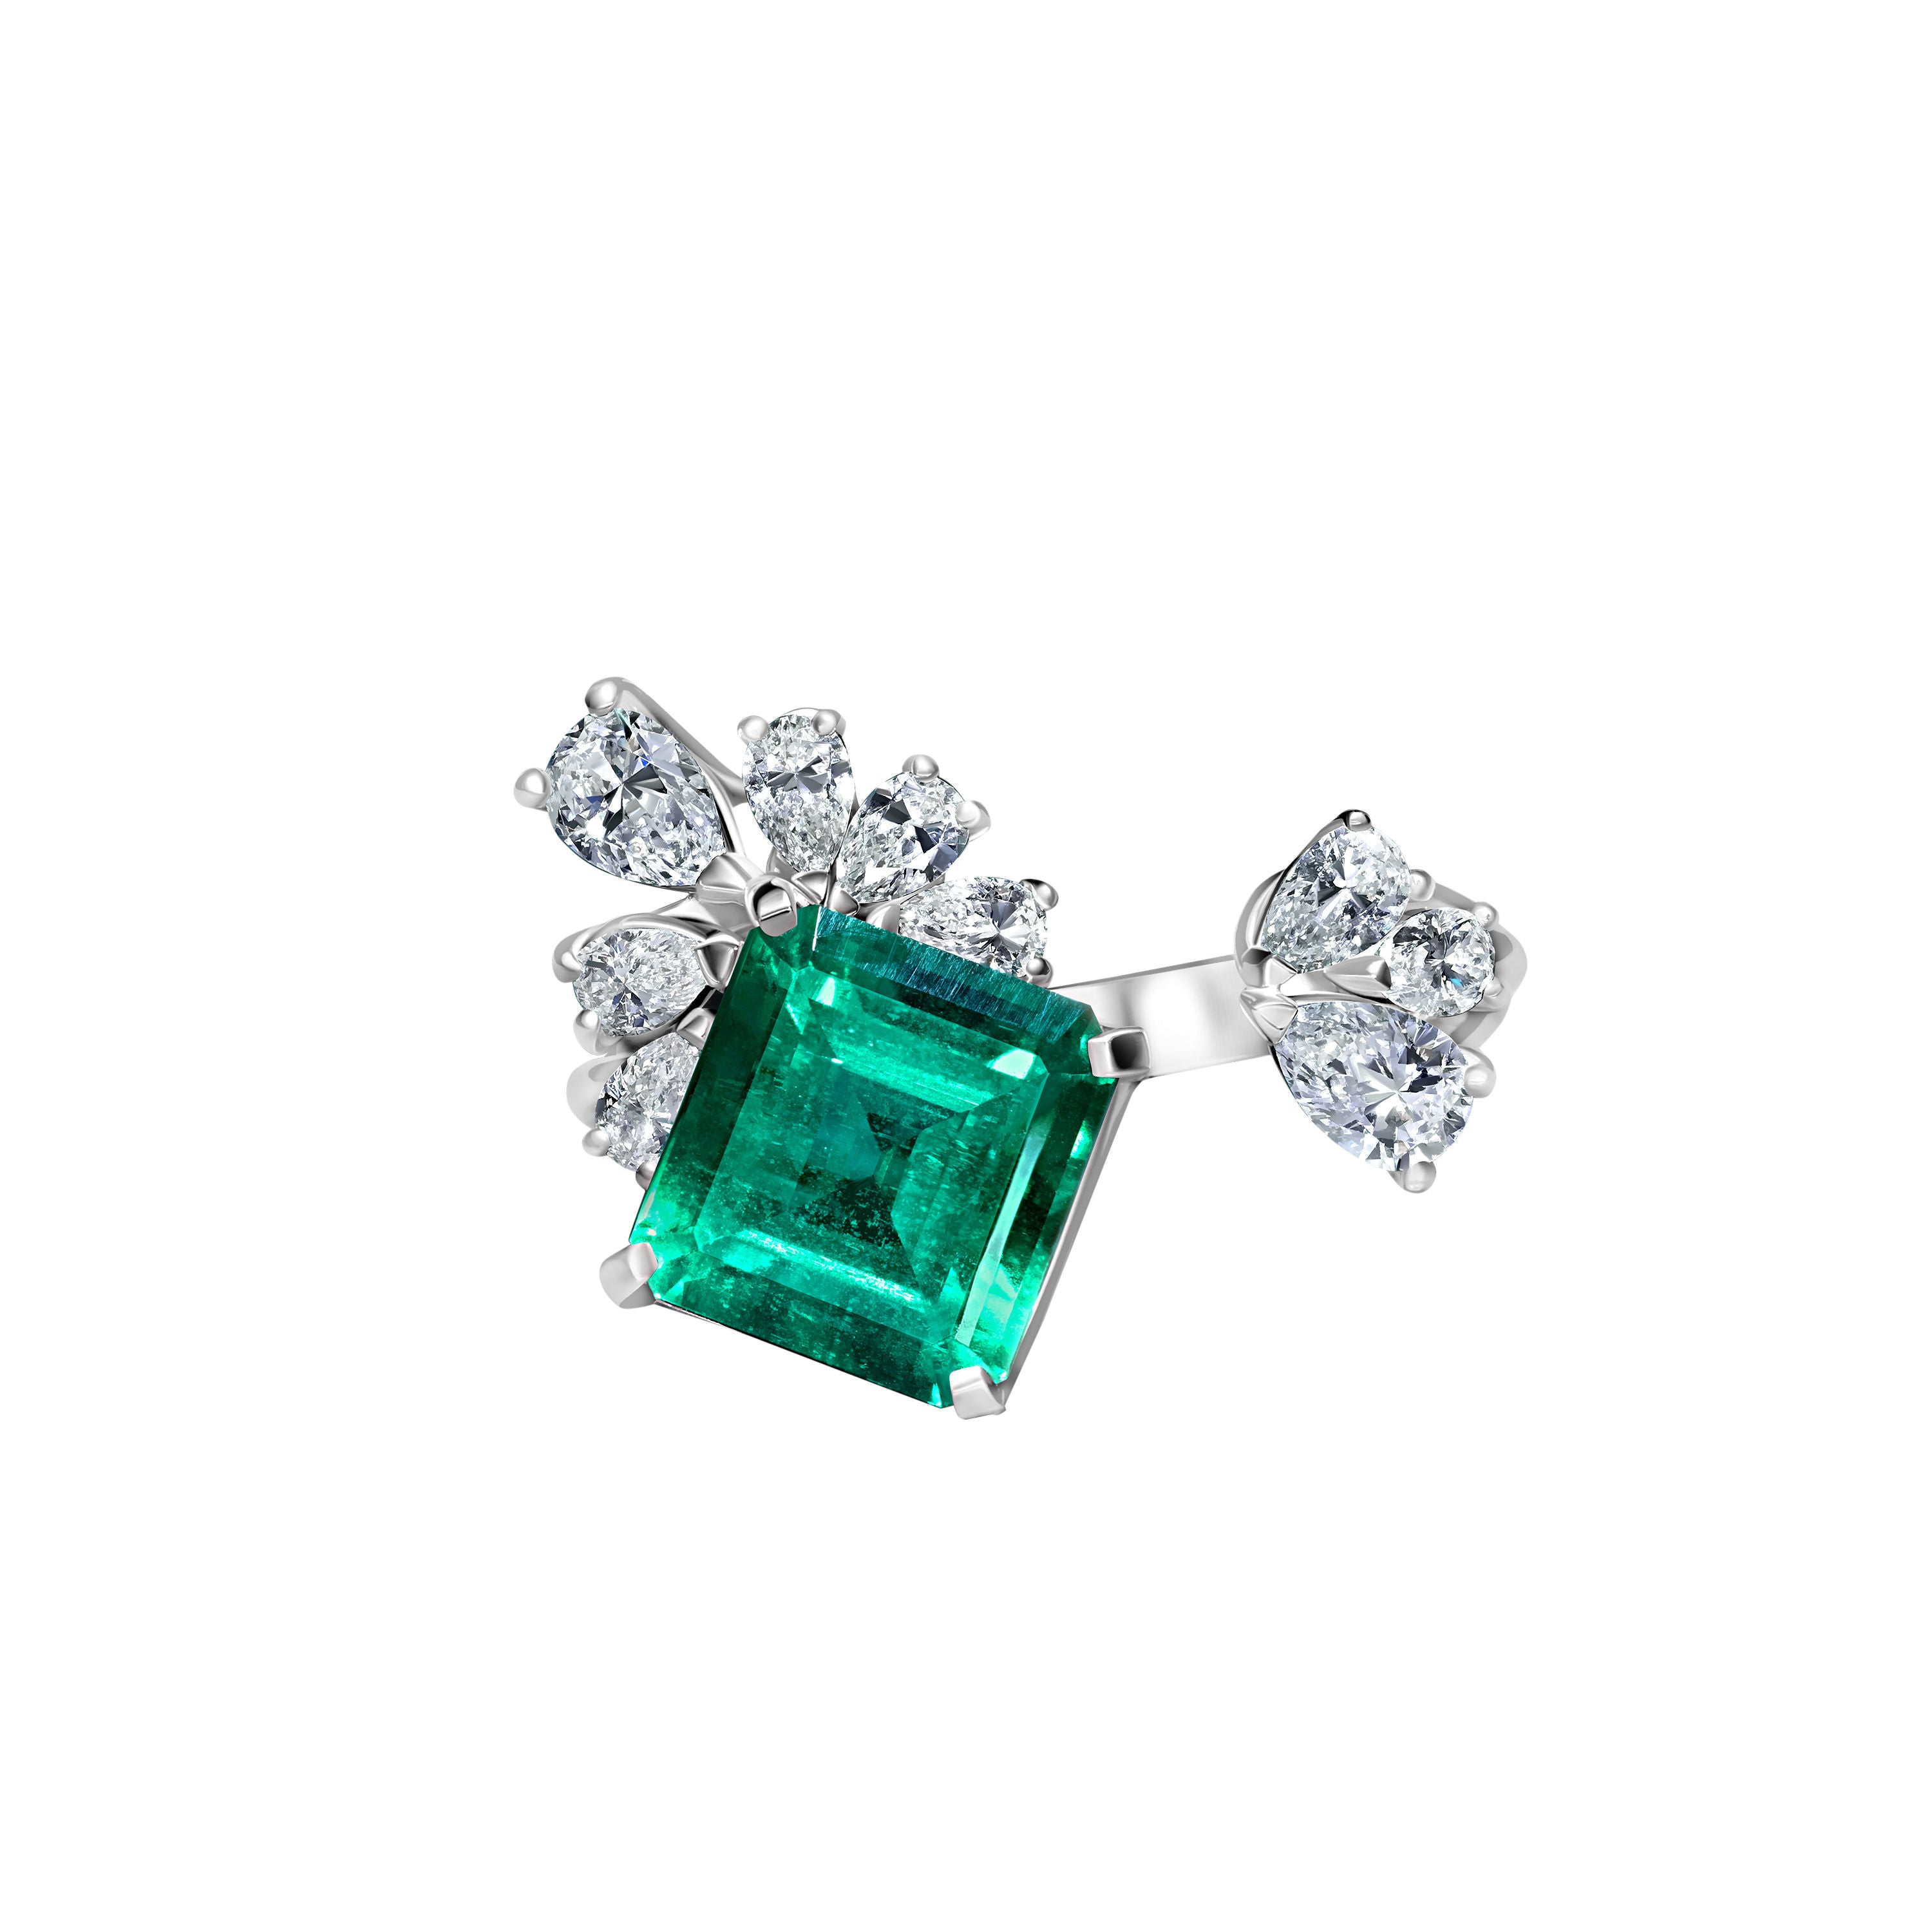 Open Shank Emerald Ring with Diamonds - 5.13ct TW